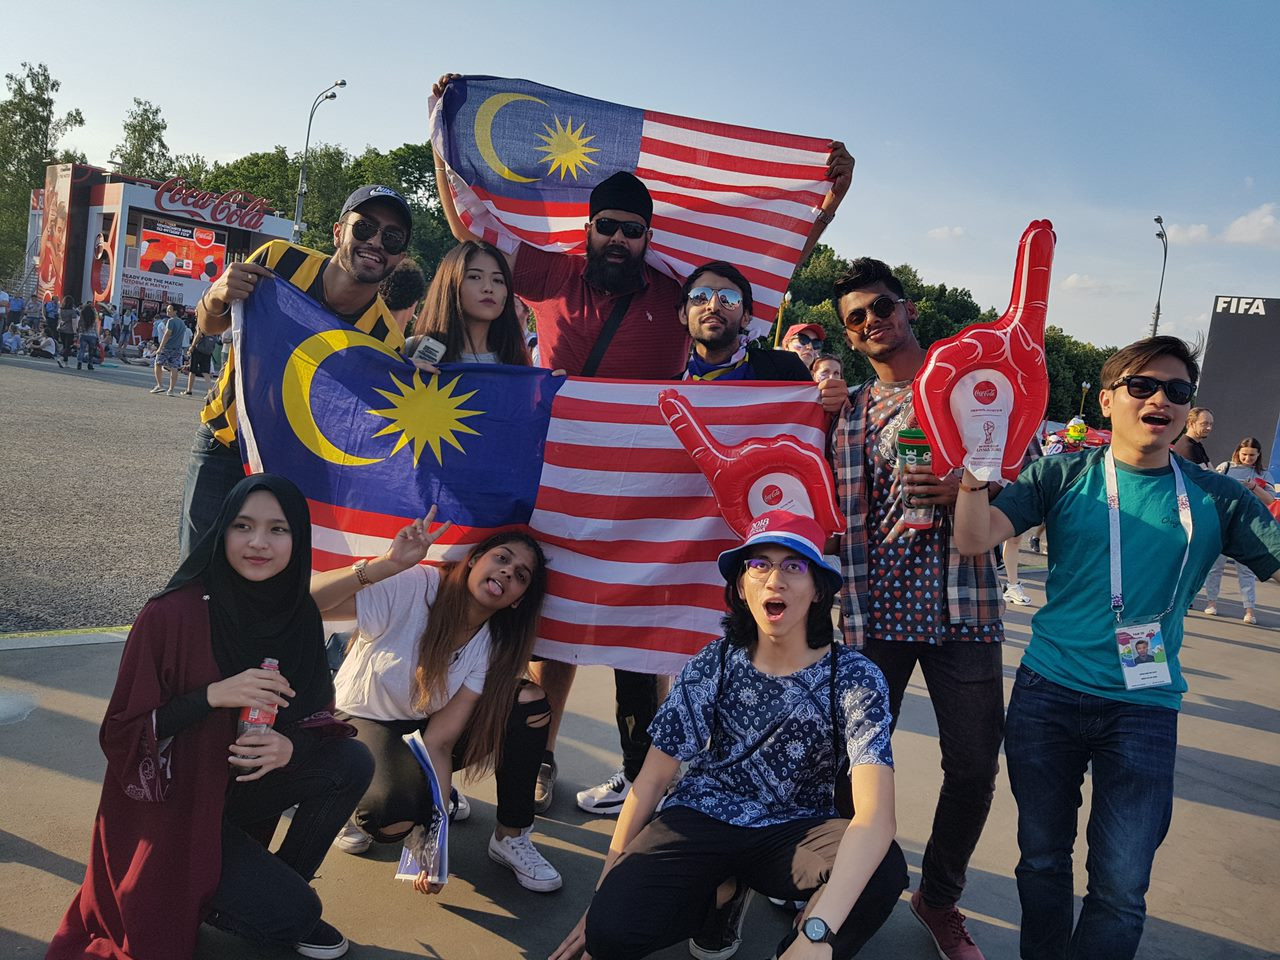 Jagjit and fellow Malaysian students during the 2018 World Cup in Russia – Pic courtesy of Jagjit Singh, December 17, 2022